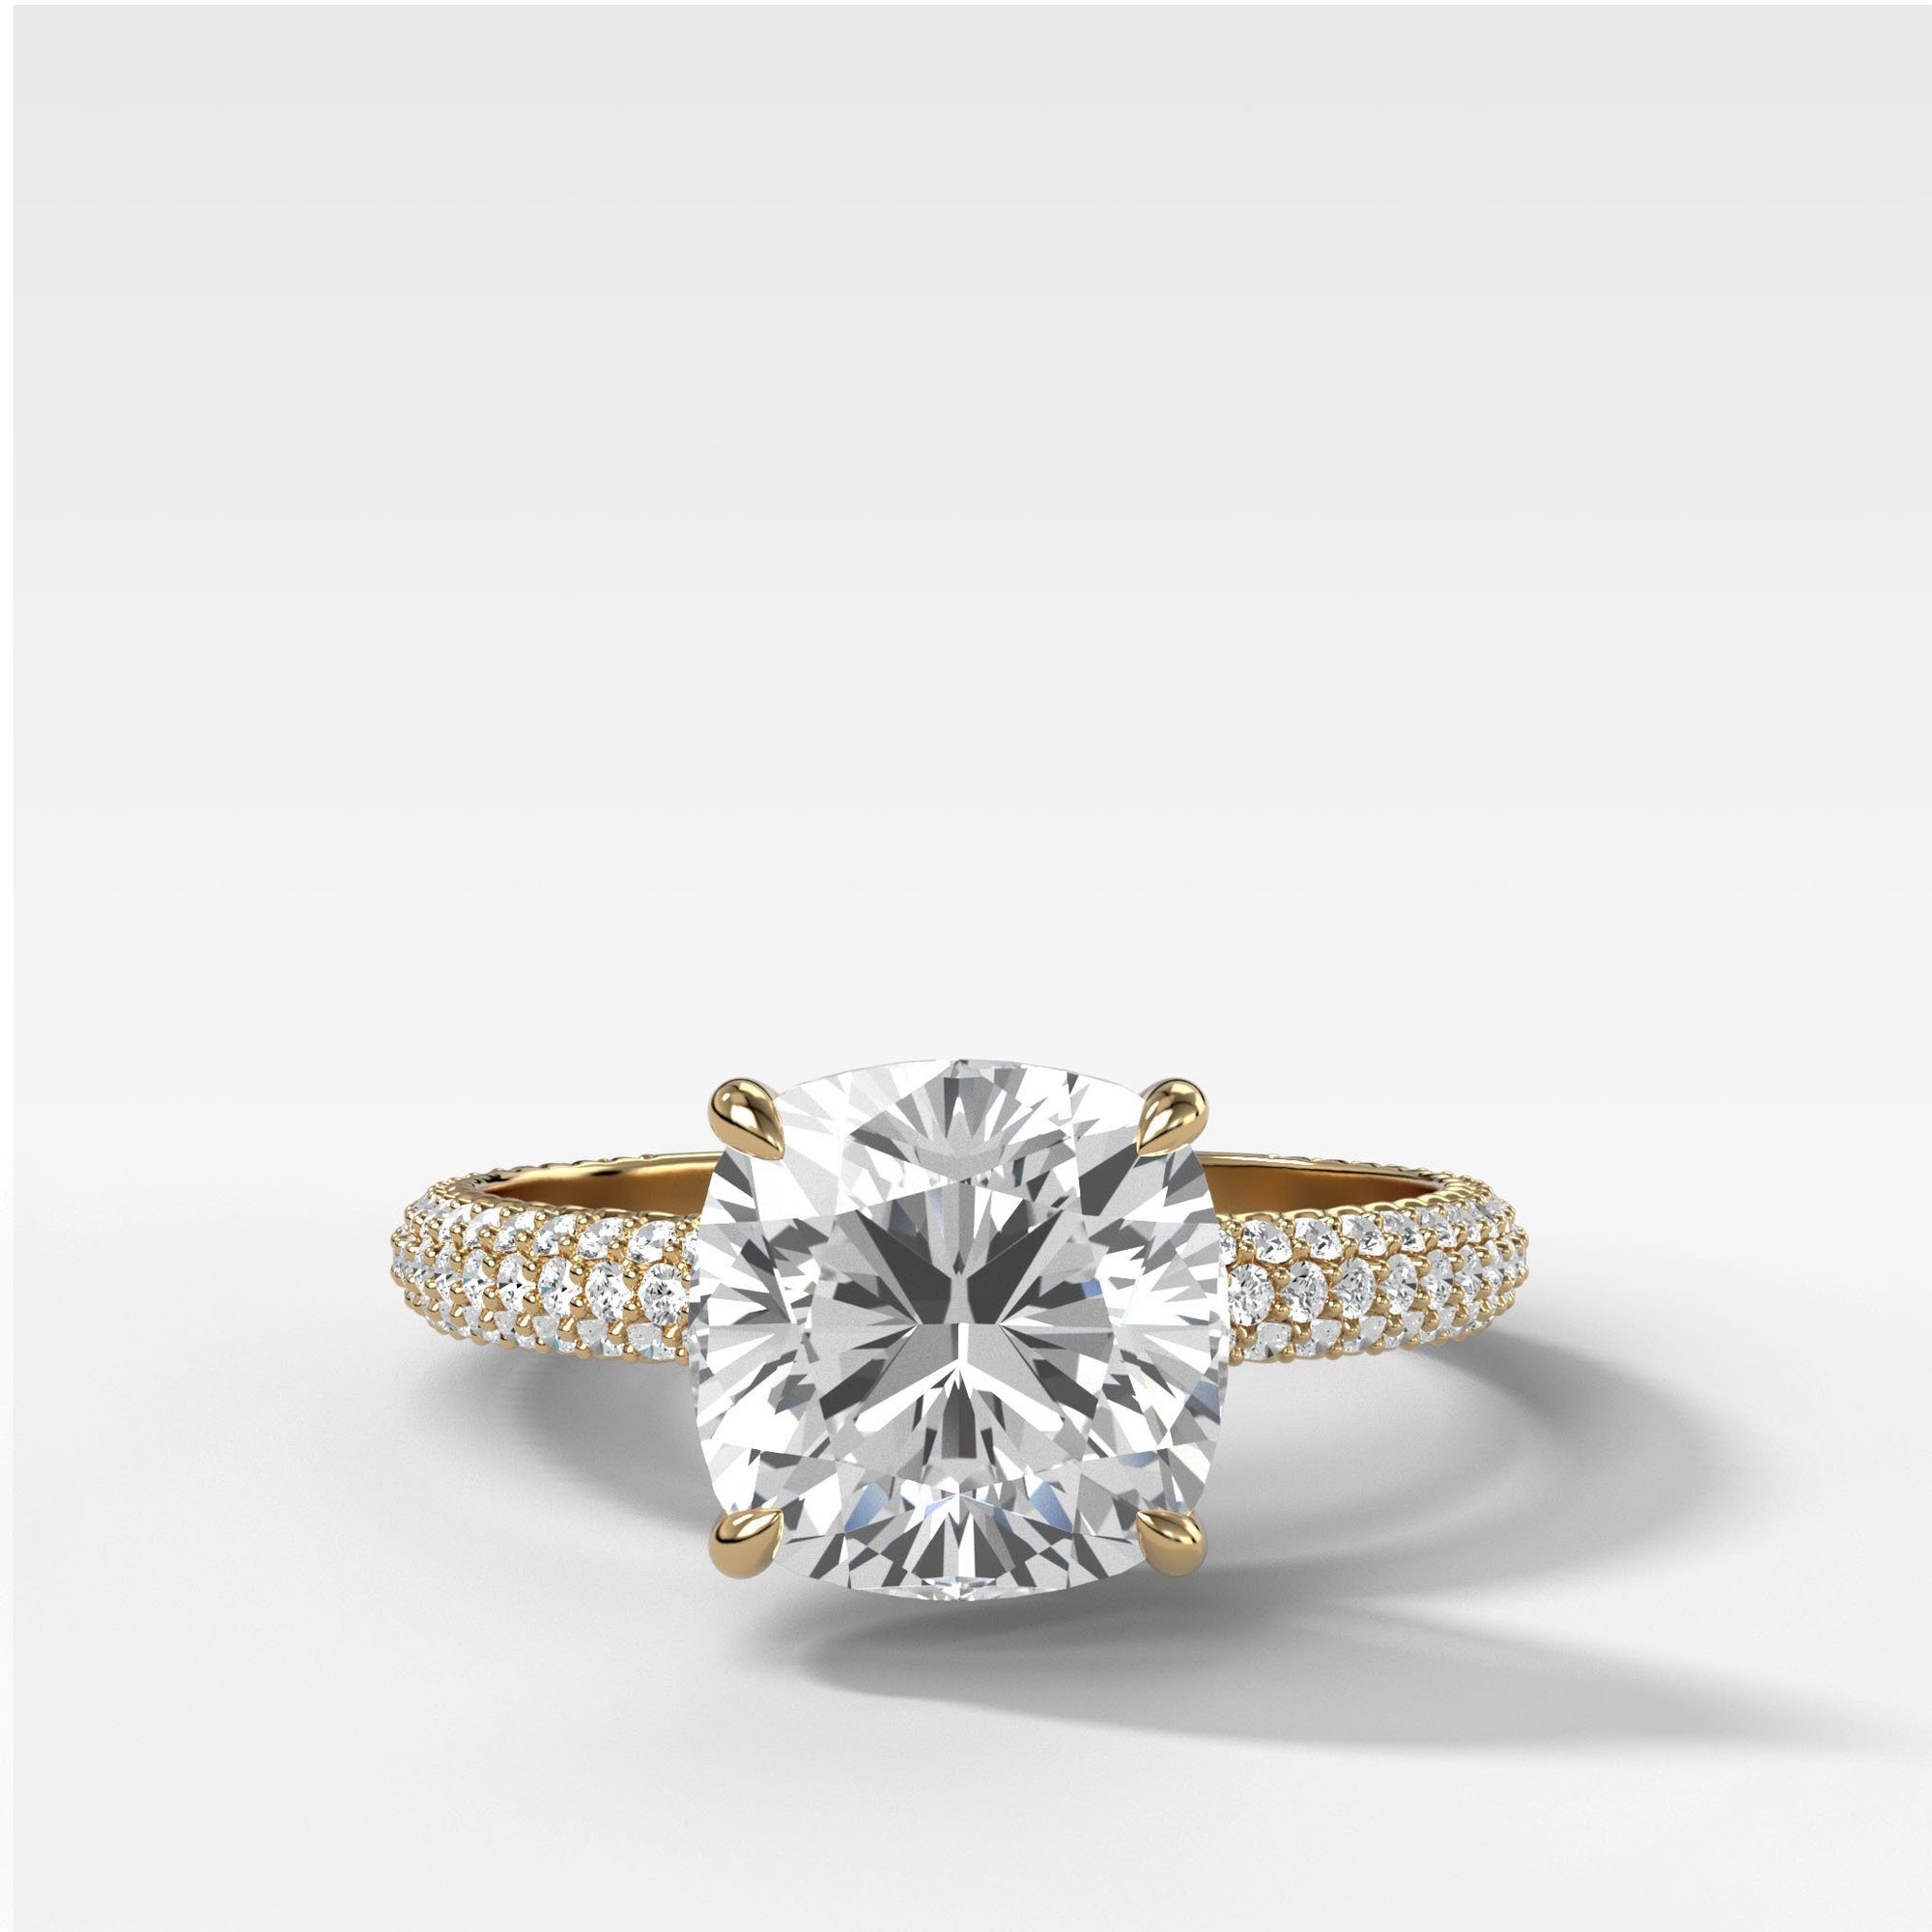 Triple Row Pavé Engagement Ring With Cushion Cut by Good Stone in Yellow Gold